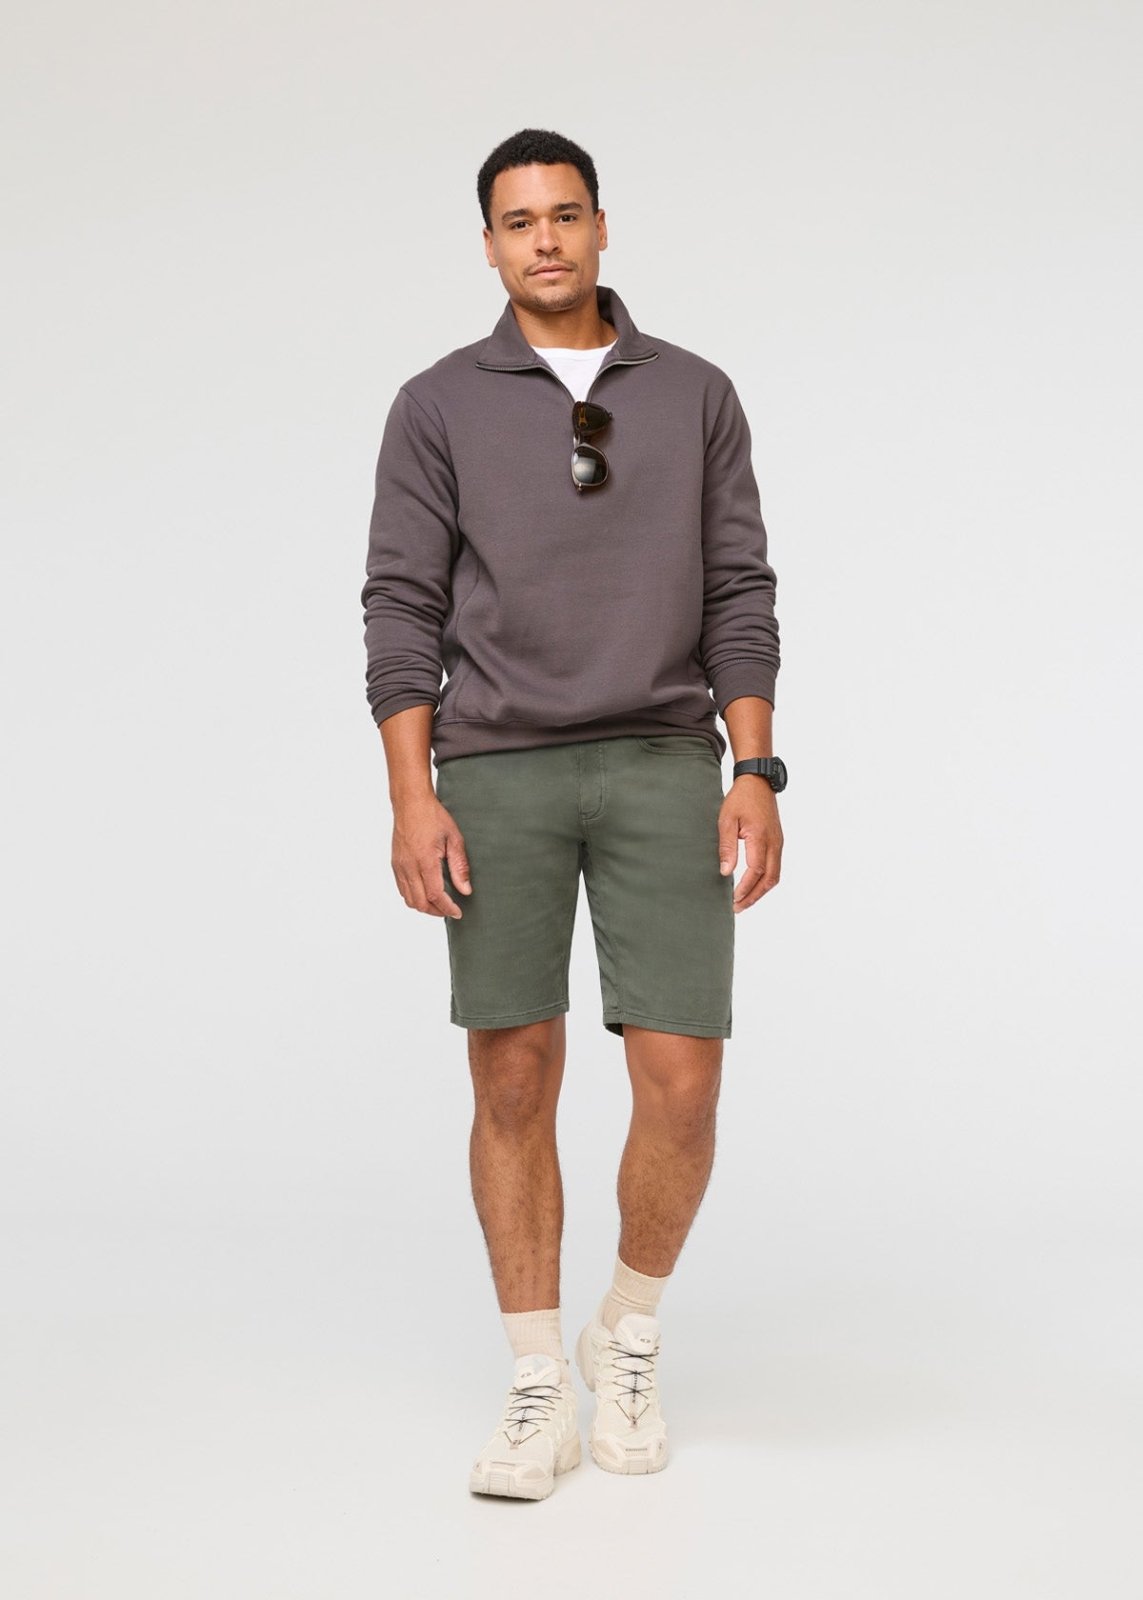 mens grey-green relaxed fit performance short full body